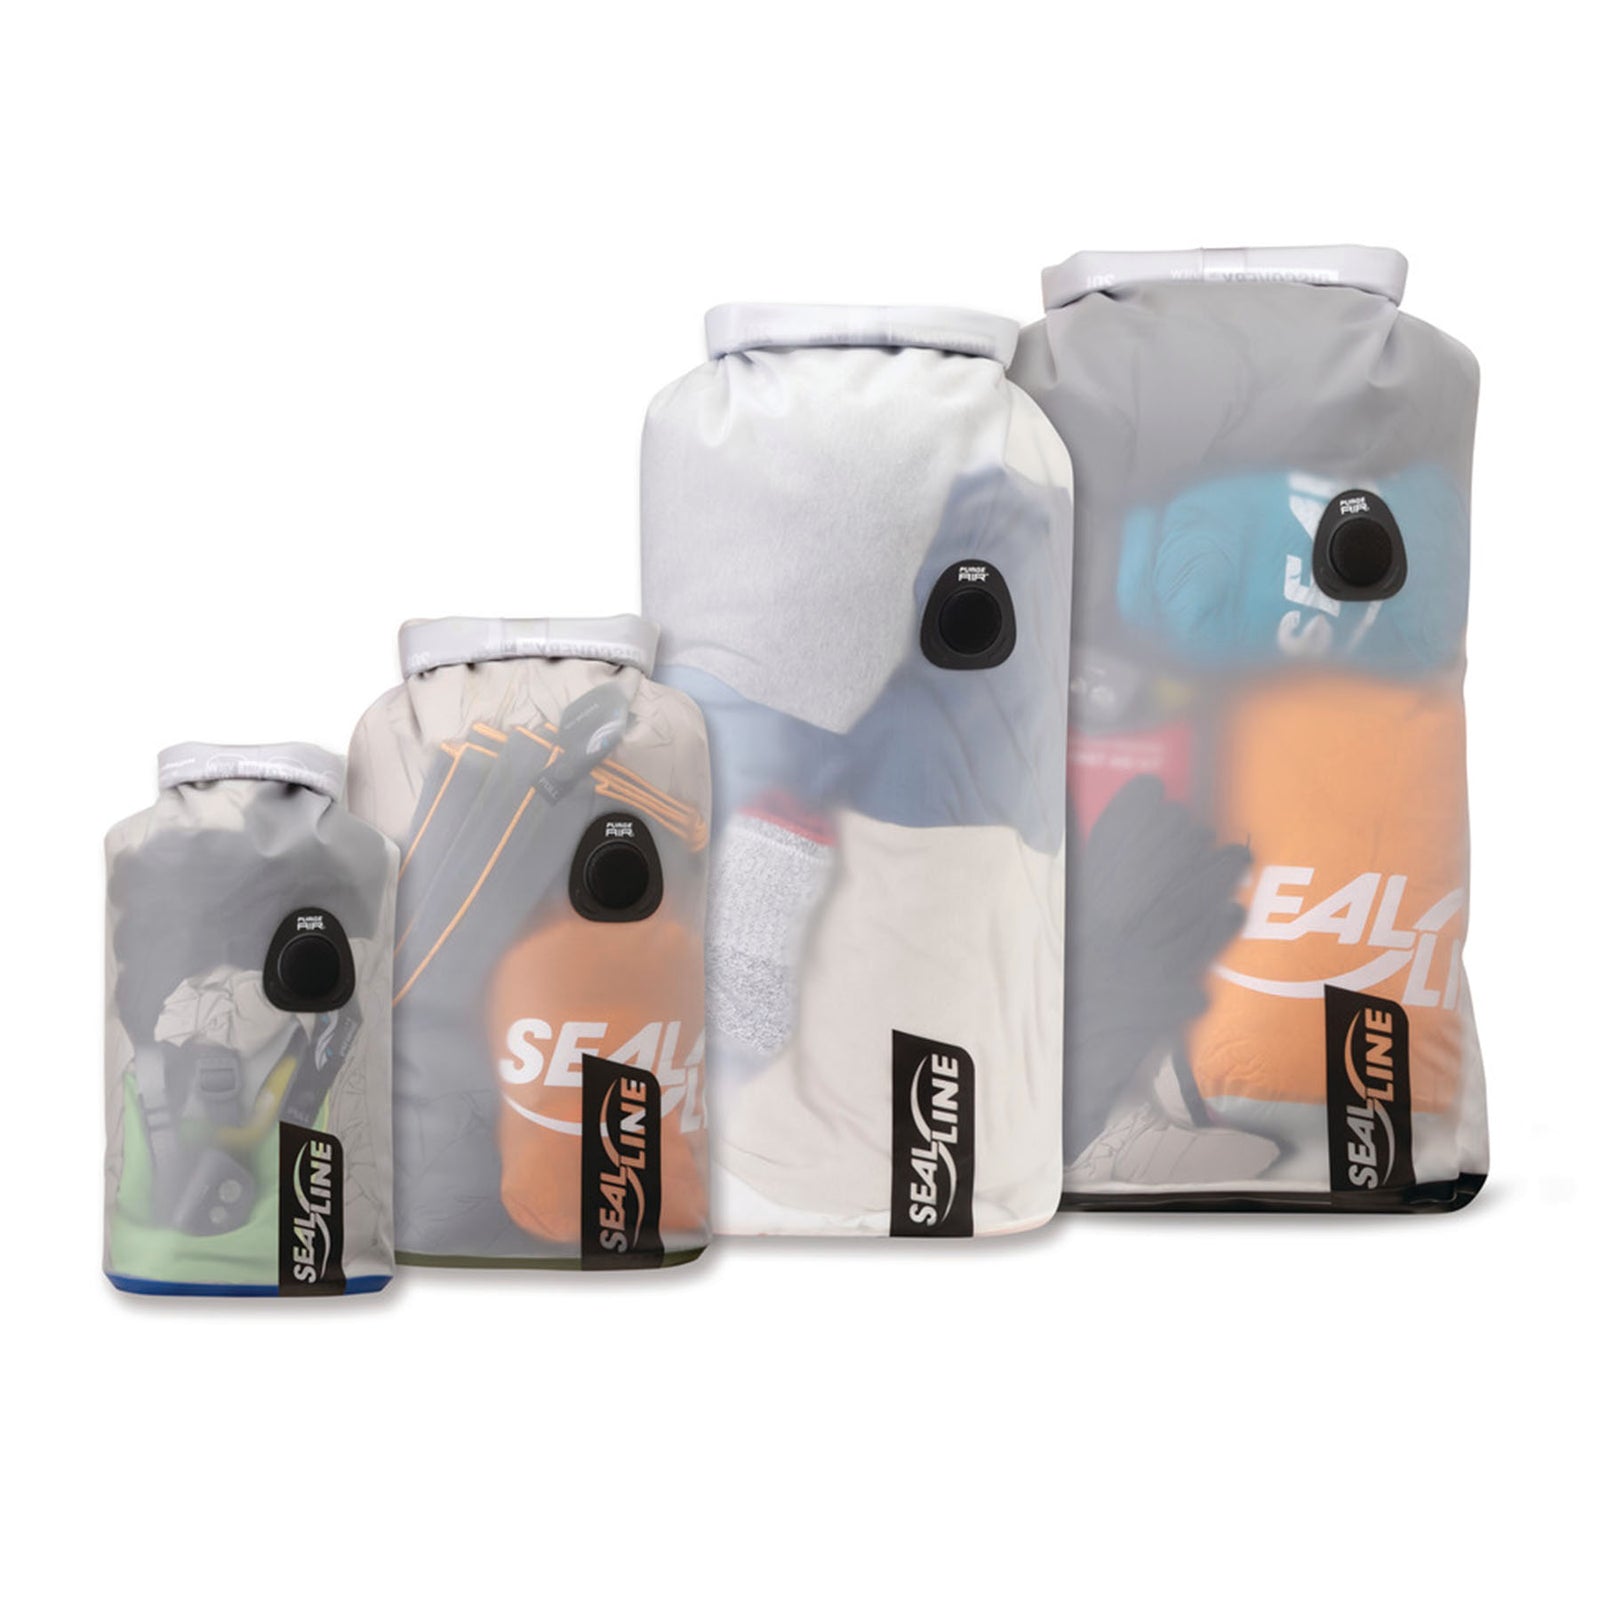 The full line of discovery dry bags